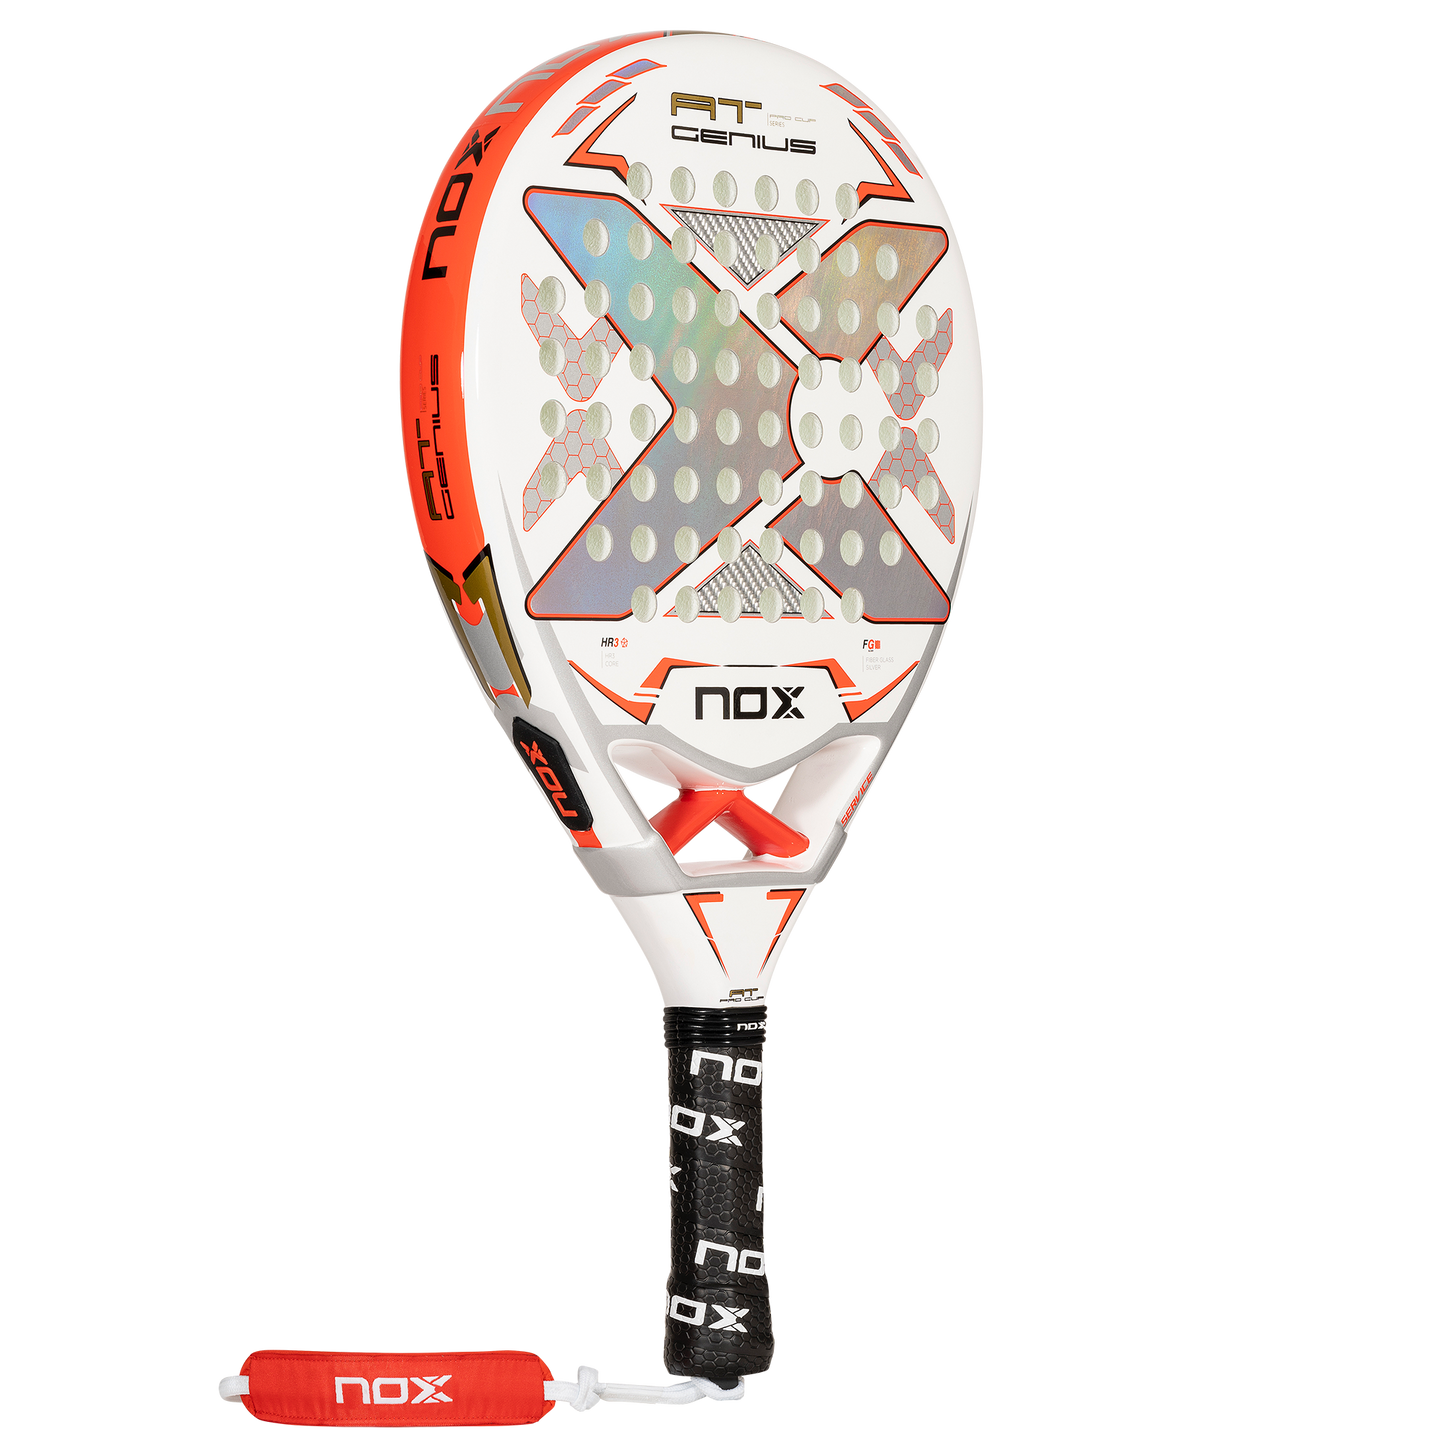 Main image of the Nox AT Pro Cup Padel Tennis Racquet on sale at thepadelshop.co.nz